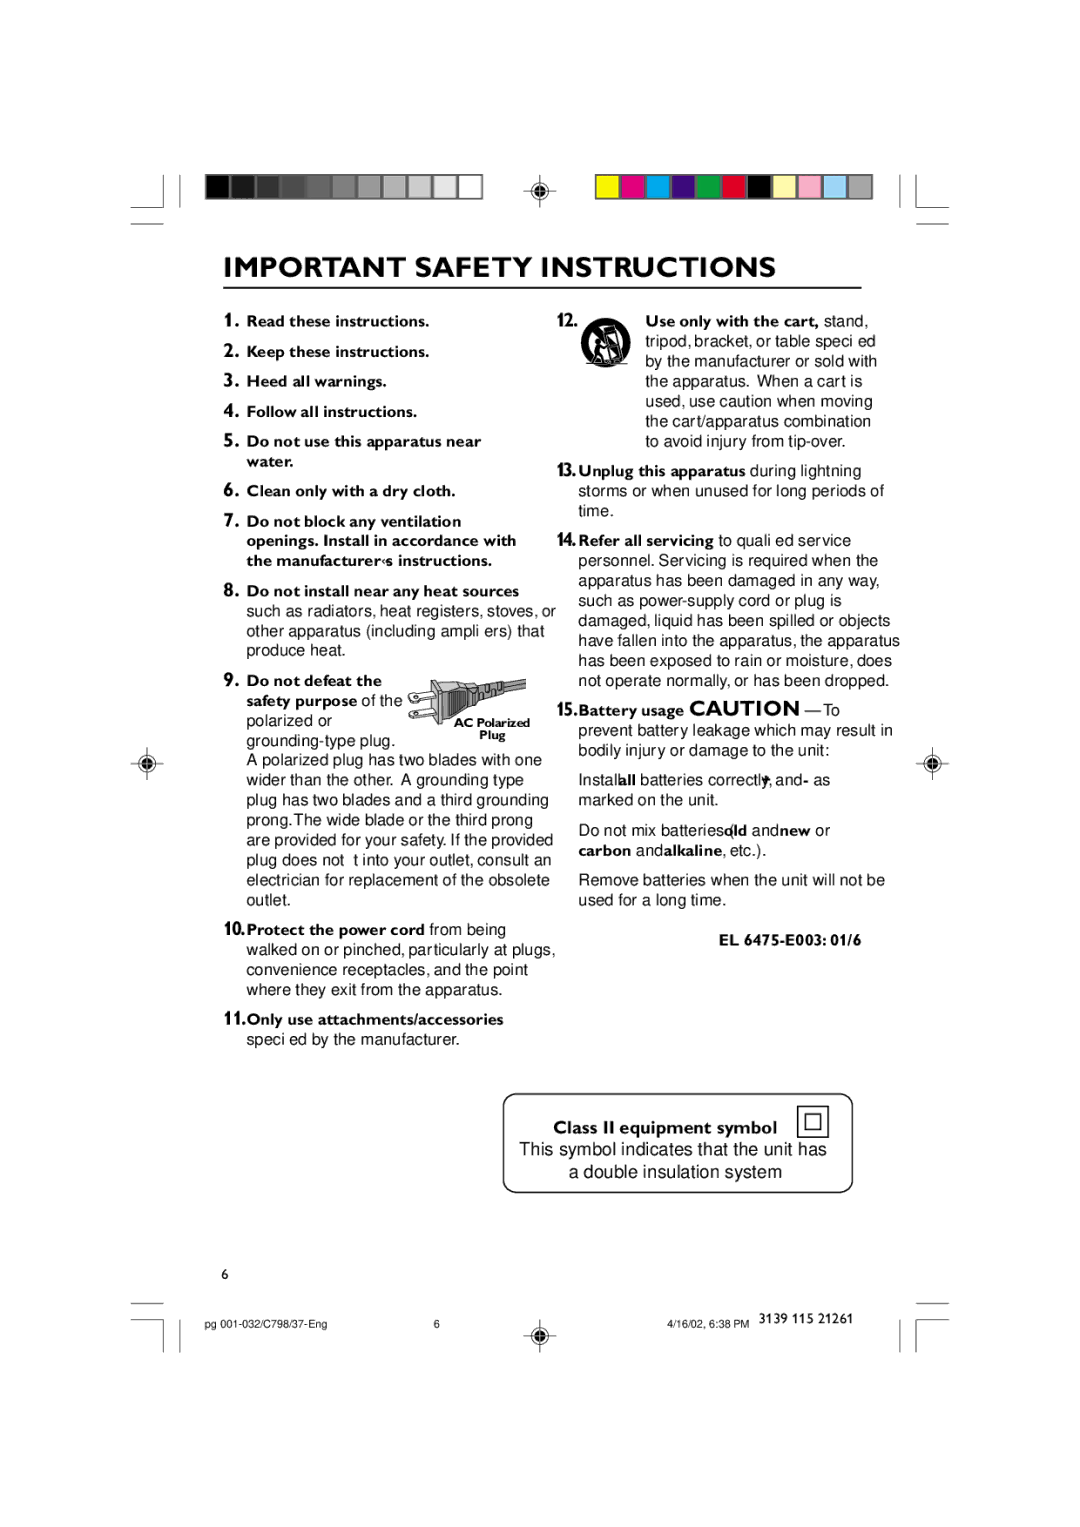 Philips C798 warranty Important Safety Instructions, Class II equipment symbol 